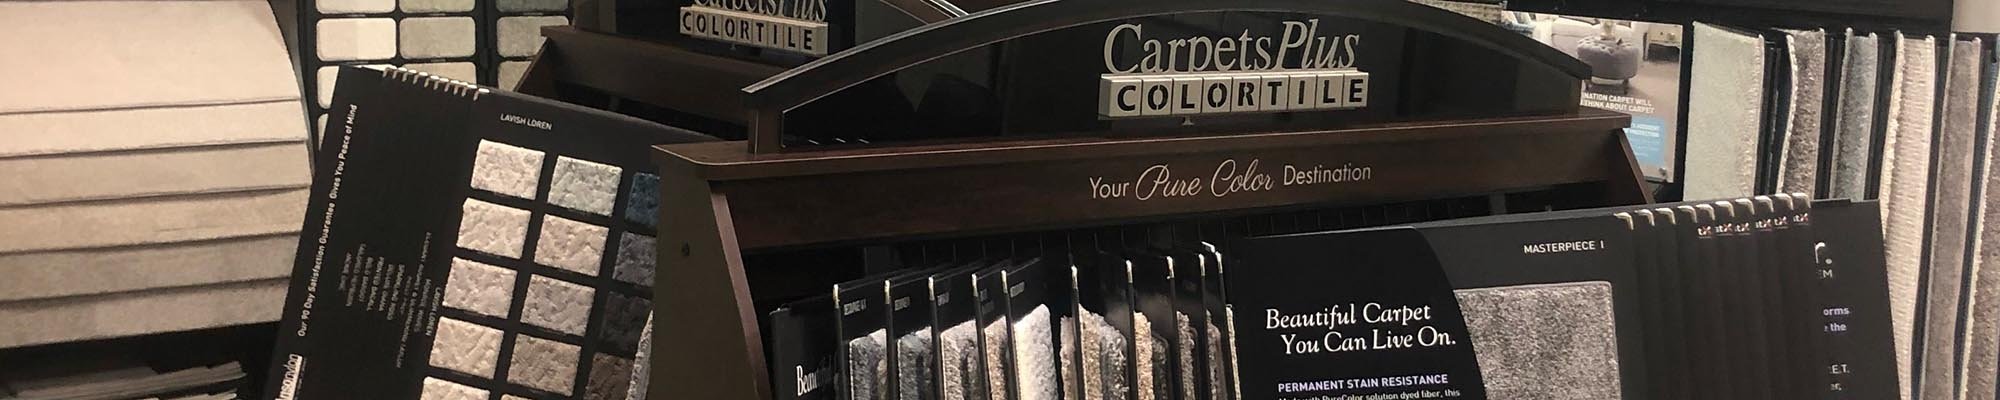 Local Flooring Retailer in Bloomington, IL - CarpetsPlus COLORTILE of Bloomington providing a wide selection of flooring and expert advice.